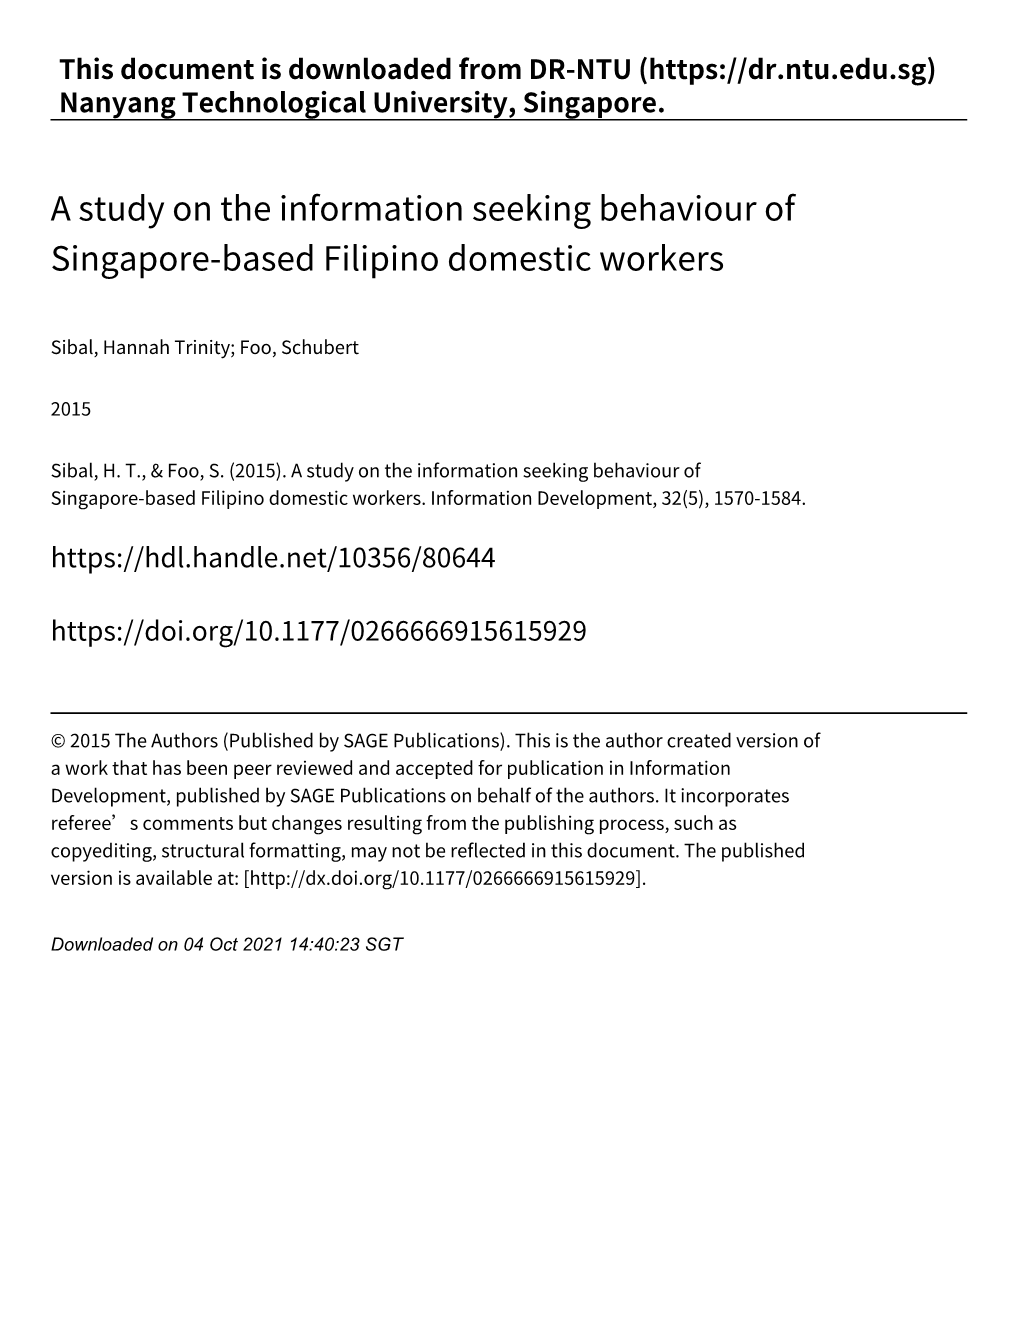 A Study on the Information Seeking Behaviour of Singapore‑Based Filipino Domestic Workers